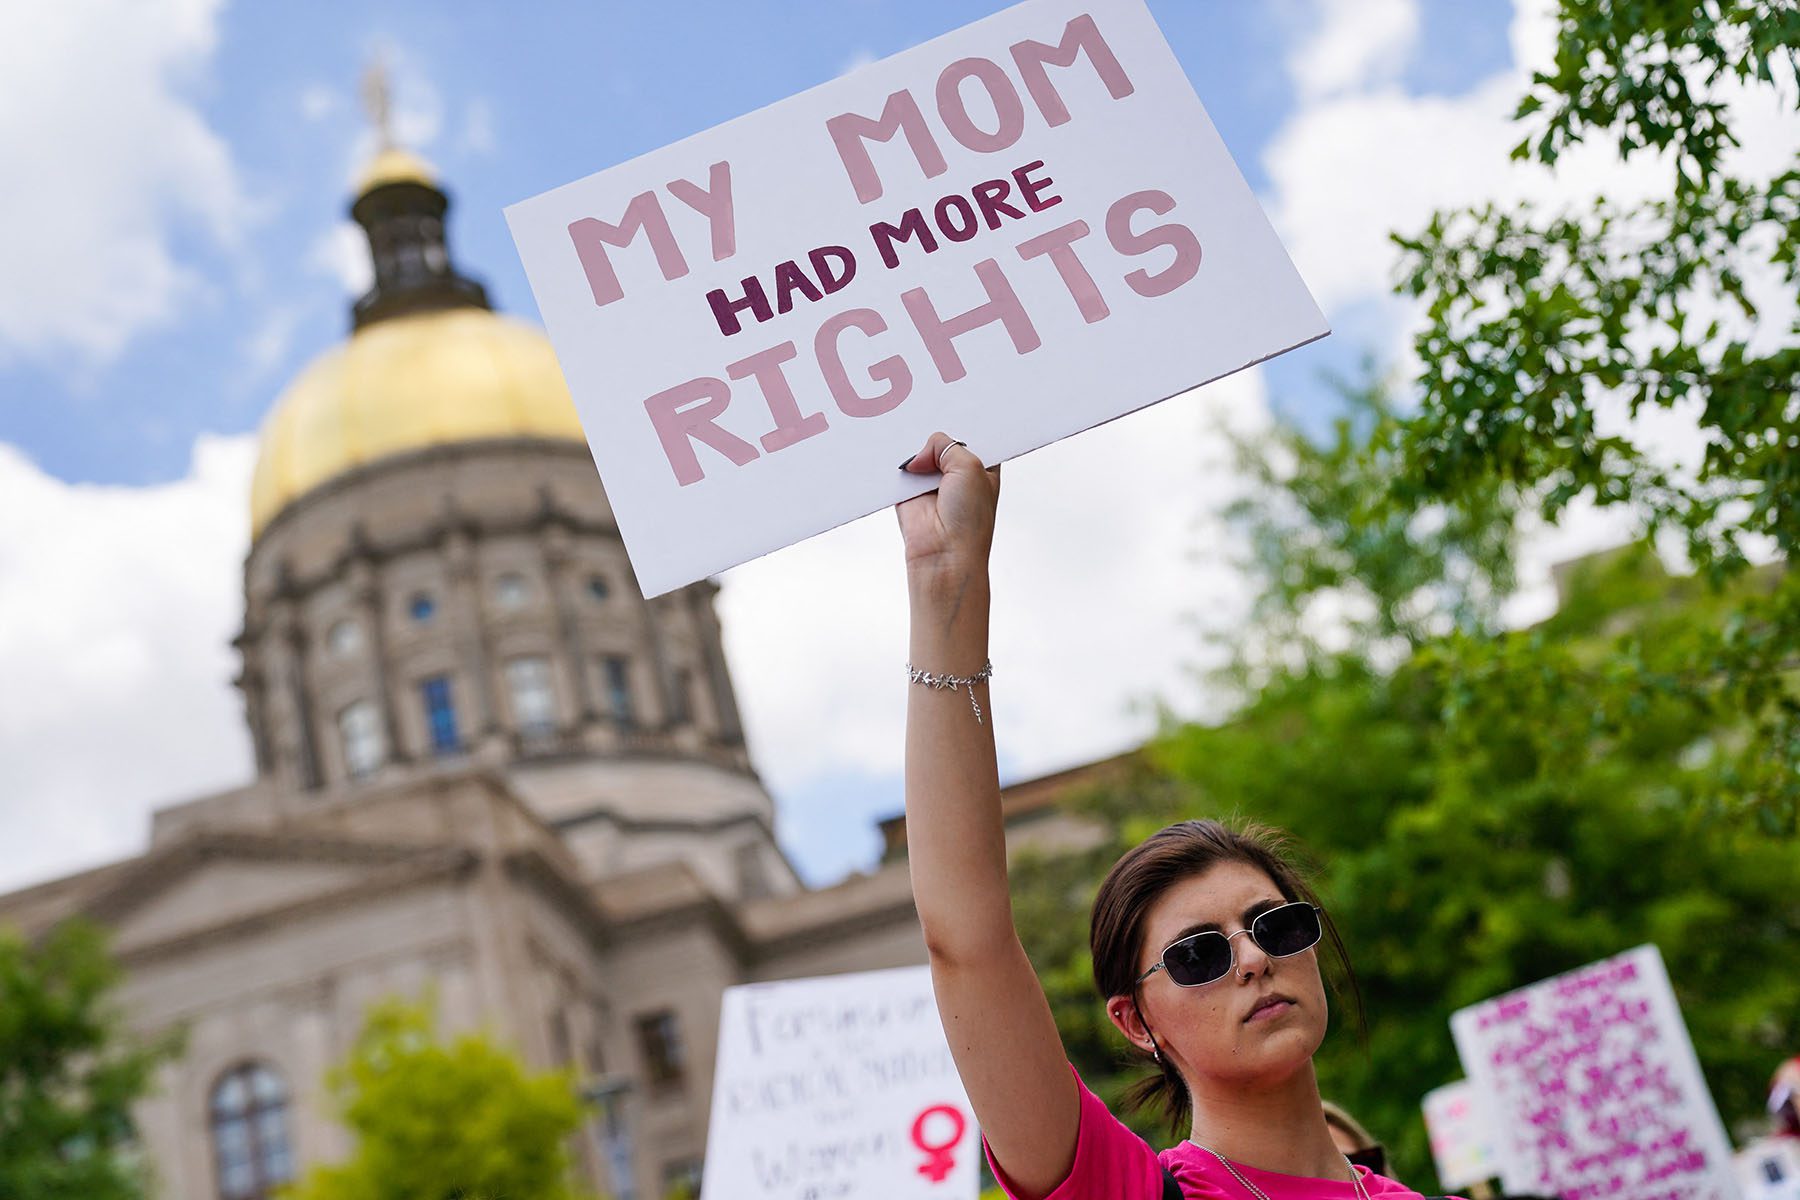 A demonstrator holding a sign that reads "My Mom Had More Rights" protests in front of the georgia supreme court.